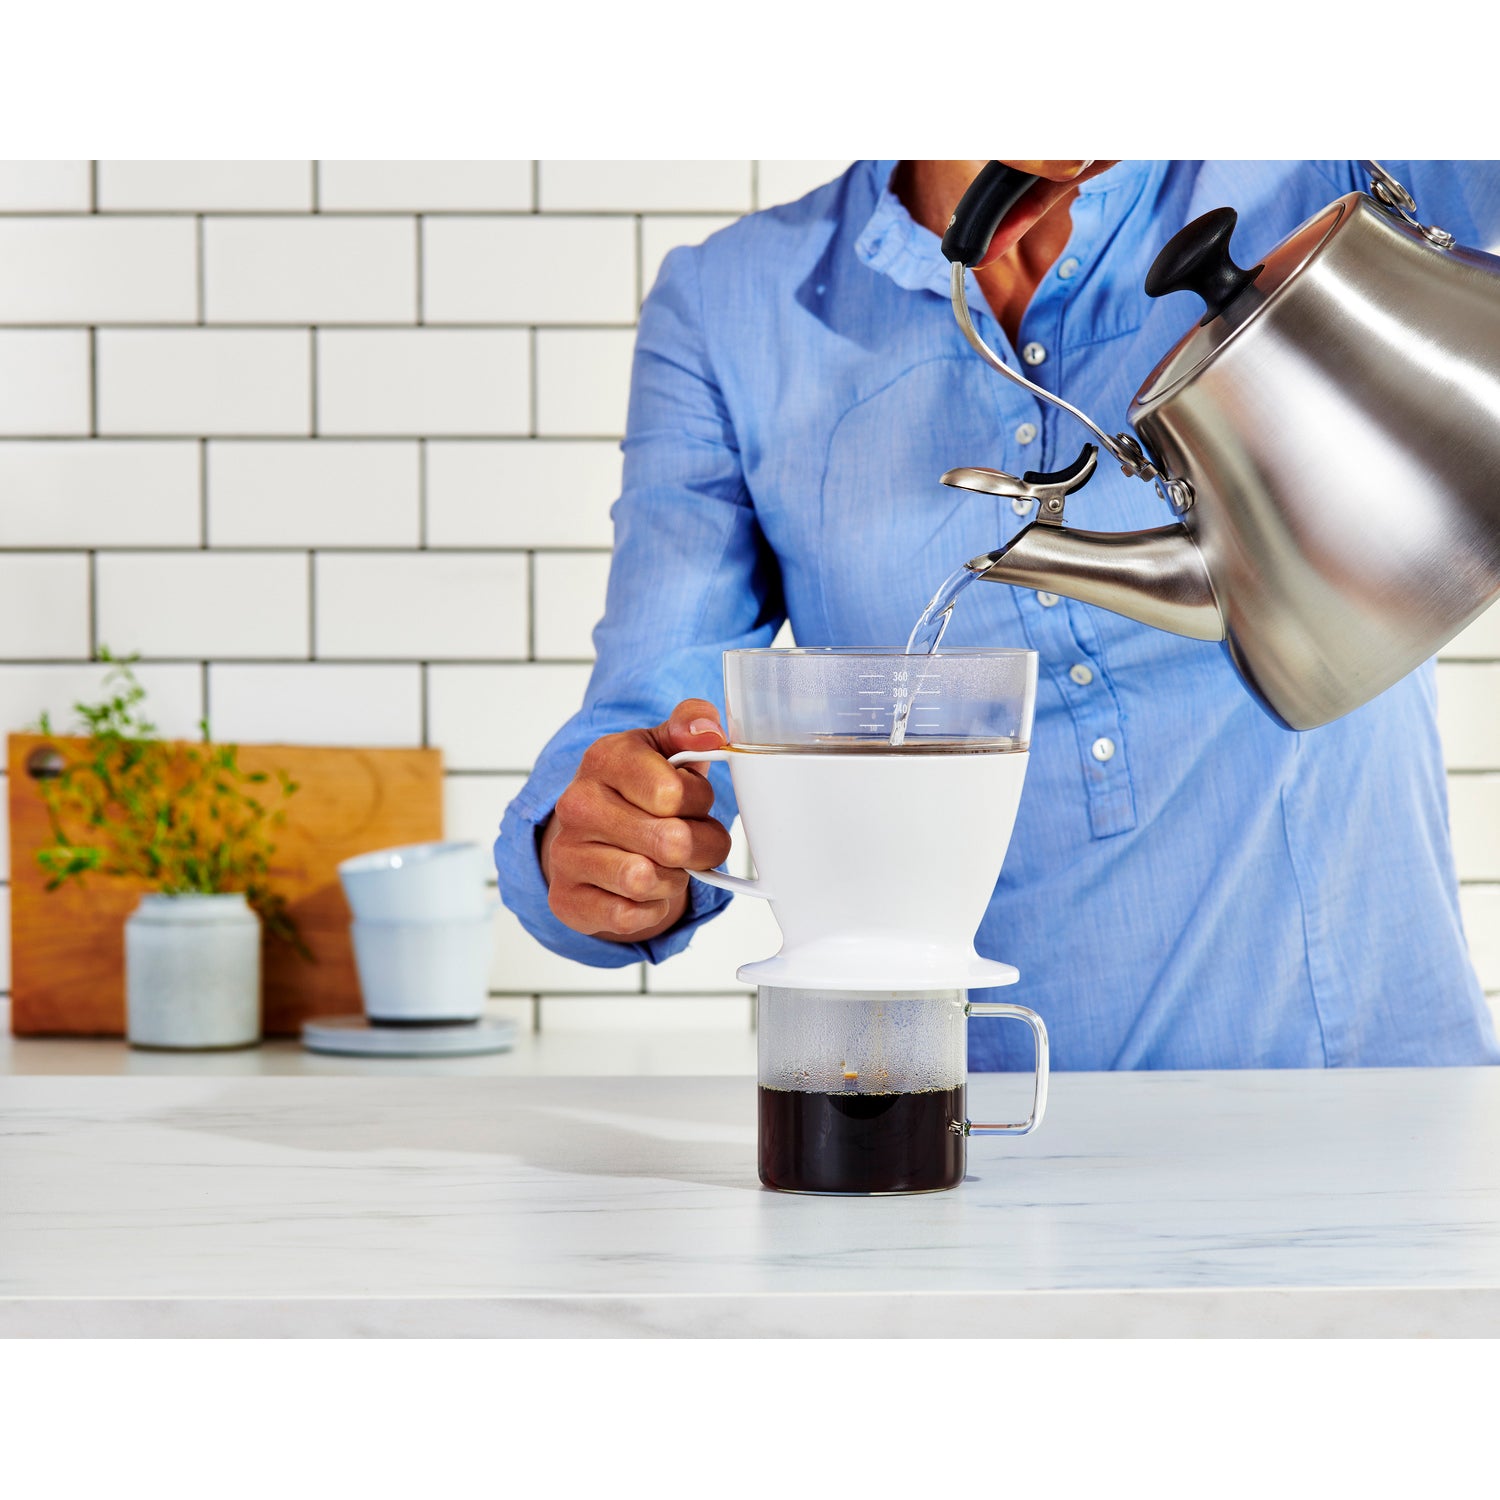 OXO Brew Single Serve Pour Over Review: In Search of a Good Cup